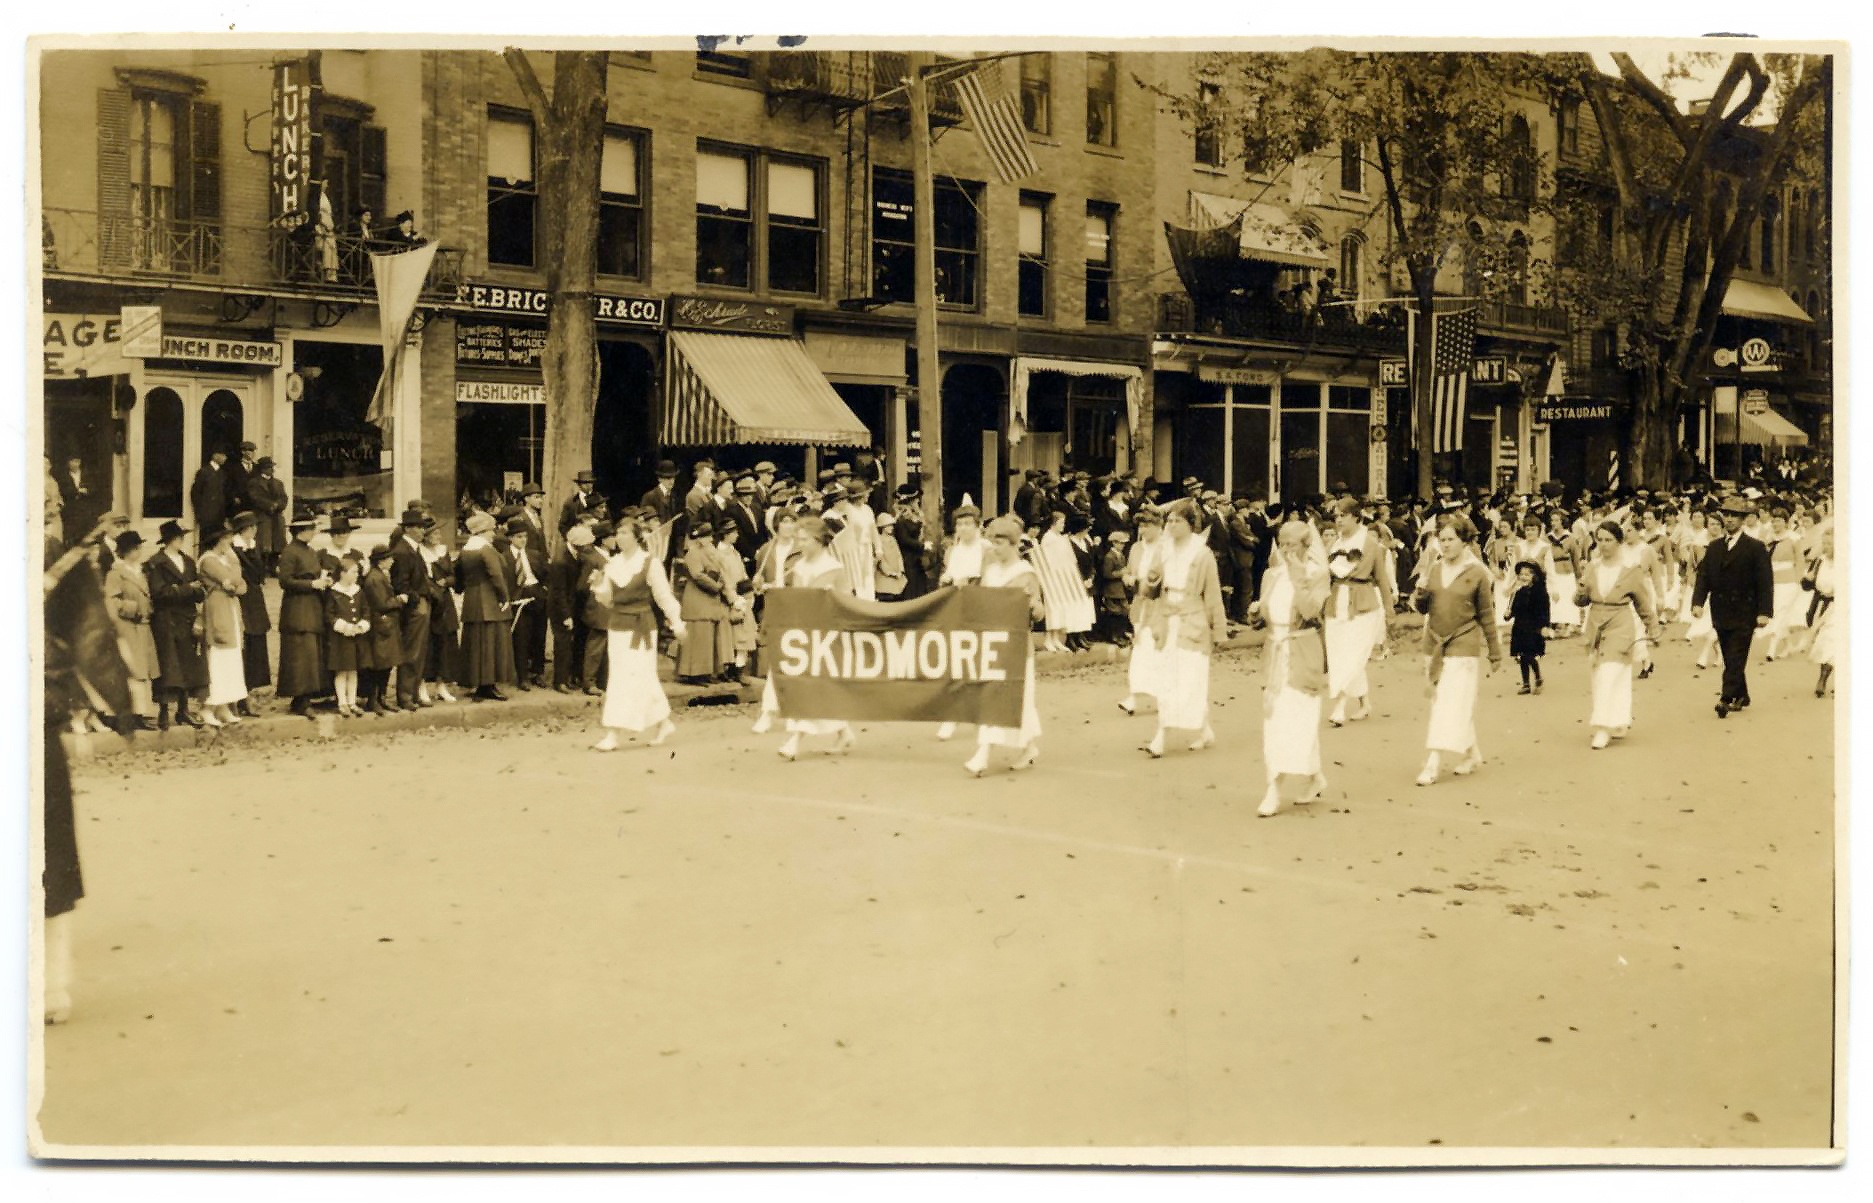 A sepia image depicts women in white dresses and darker coats parading on the street. Two women in the front are holding a banner saying “Skidmore.” Spectators witness the parade from the side.